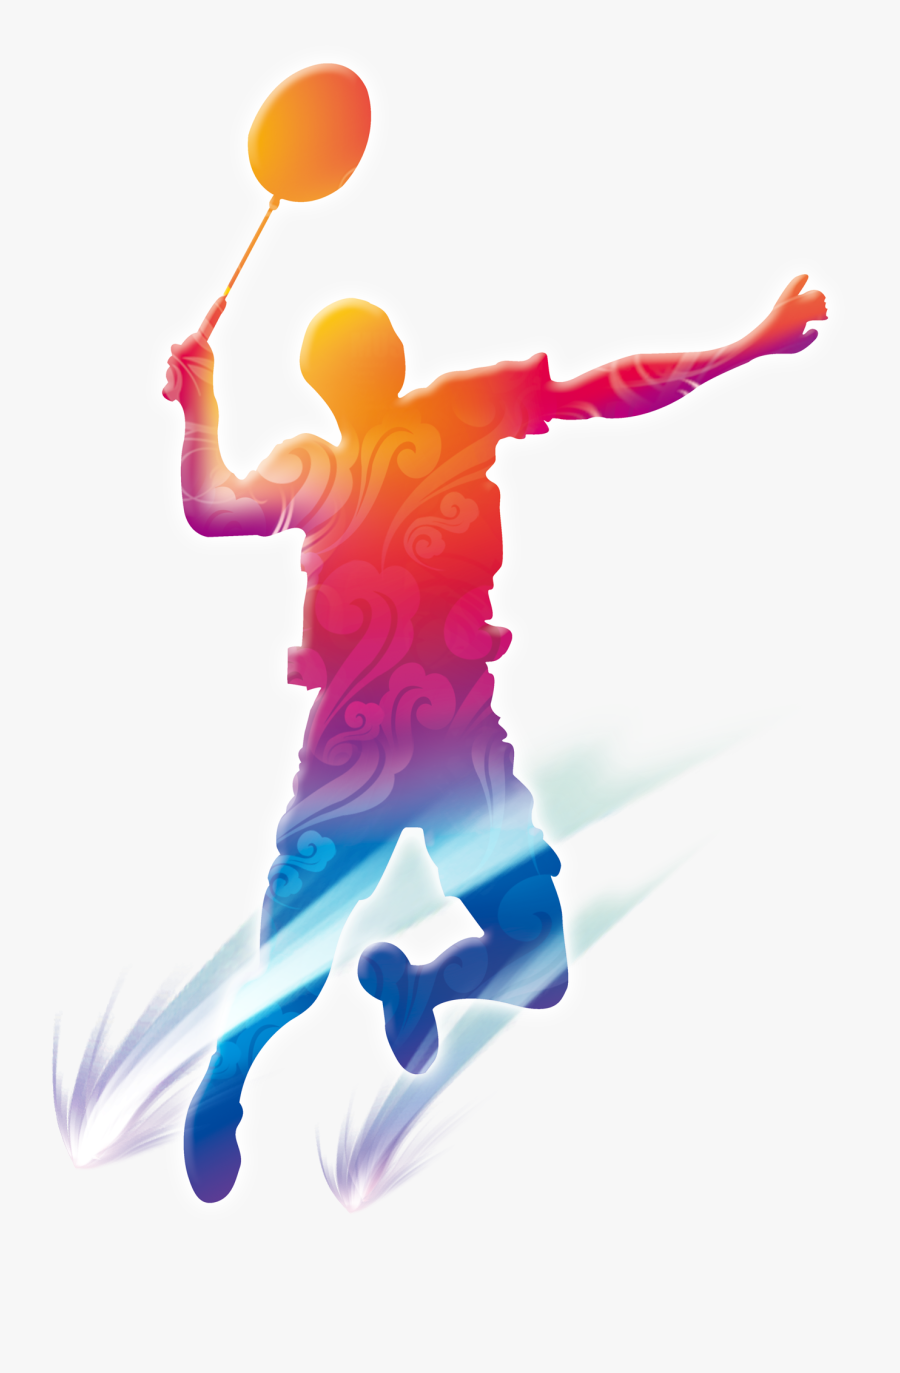 Of Silhouettes Badminton Playing People Free Hd Image , Free